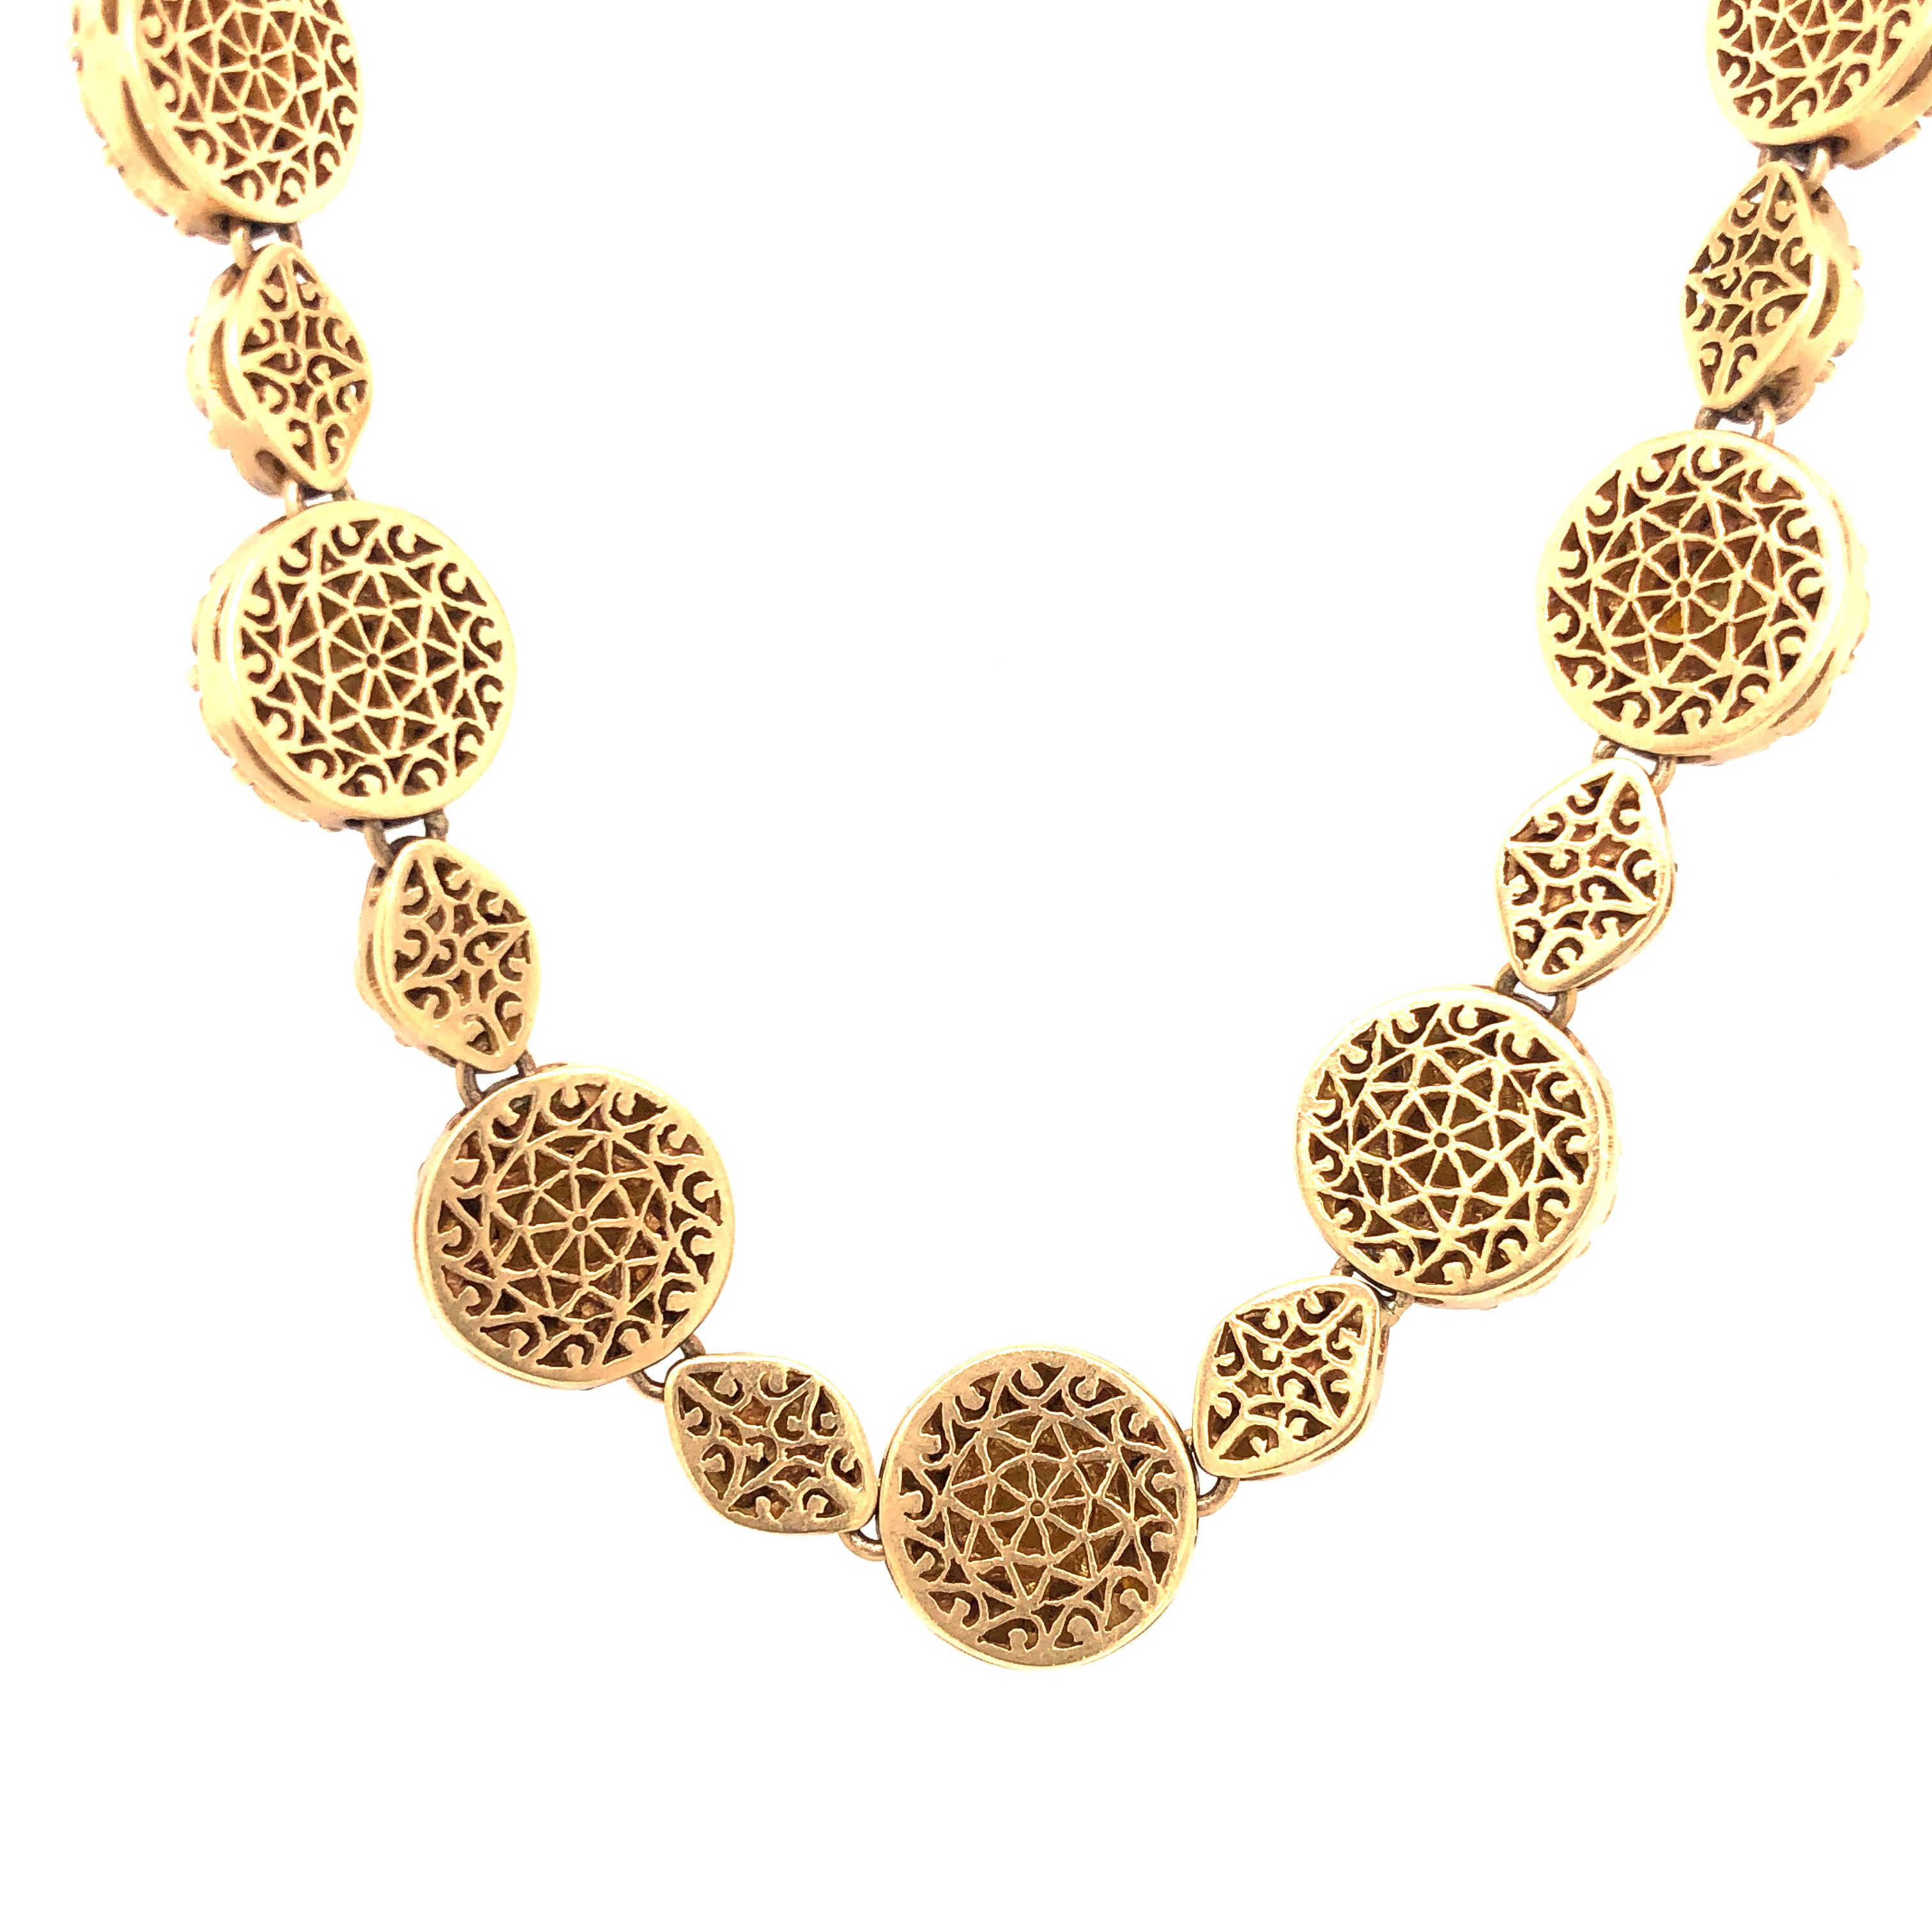 Victorian 13.48ct Rosecut Diamonds Evergreen Stunning Necklace In 18k Yellow Gold For Sale